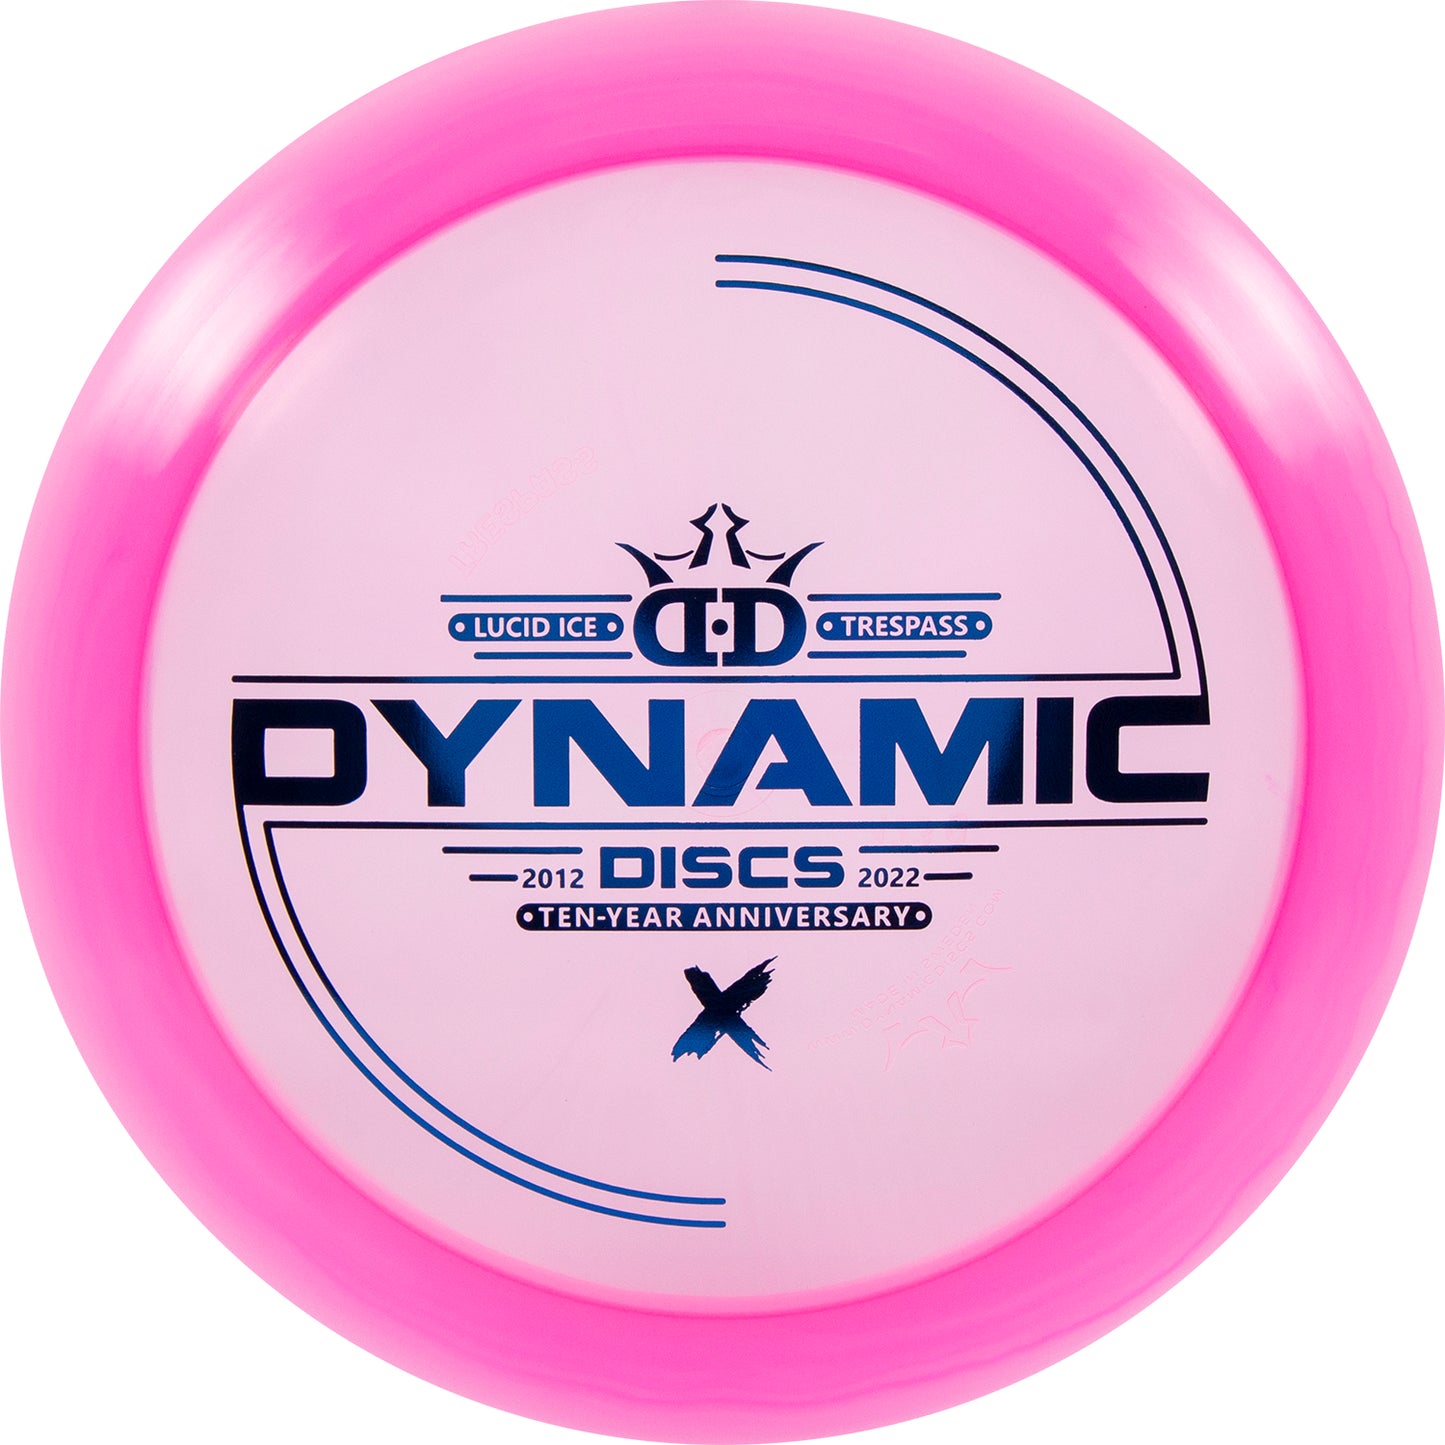 Dynamic Discs Lucid-Ice Trespass 10 Year Anniversary Stamp